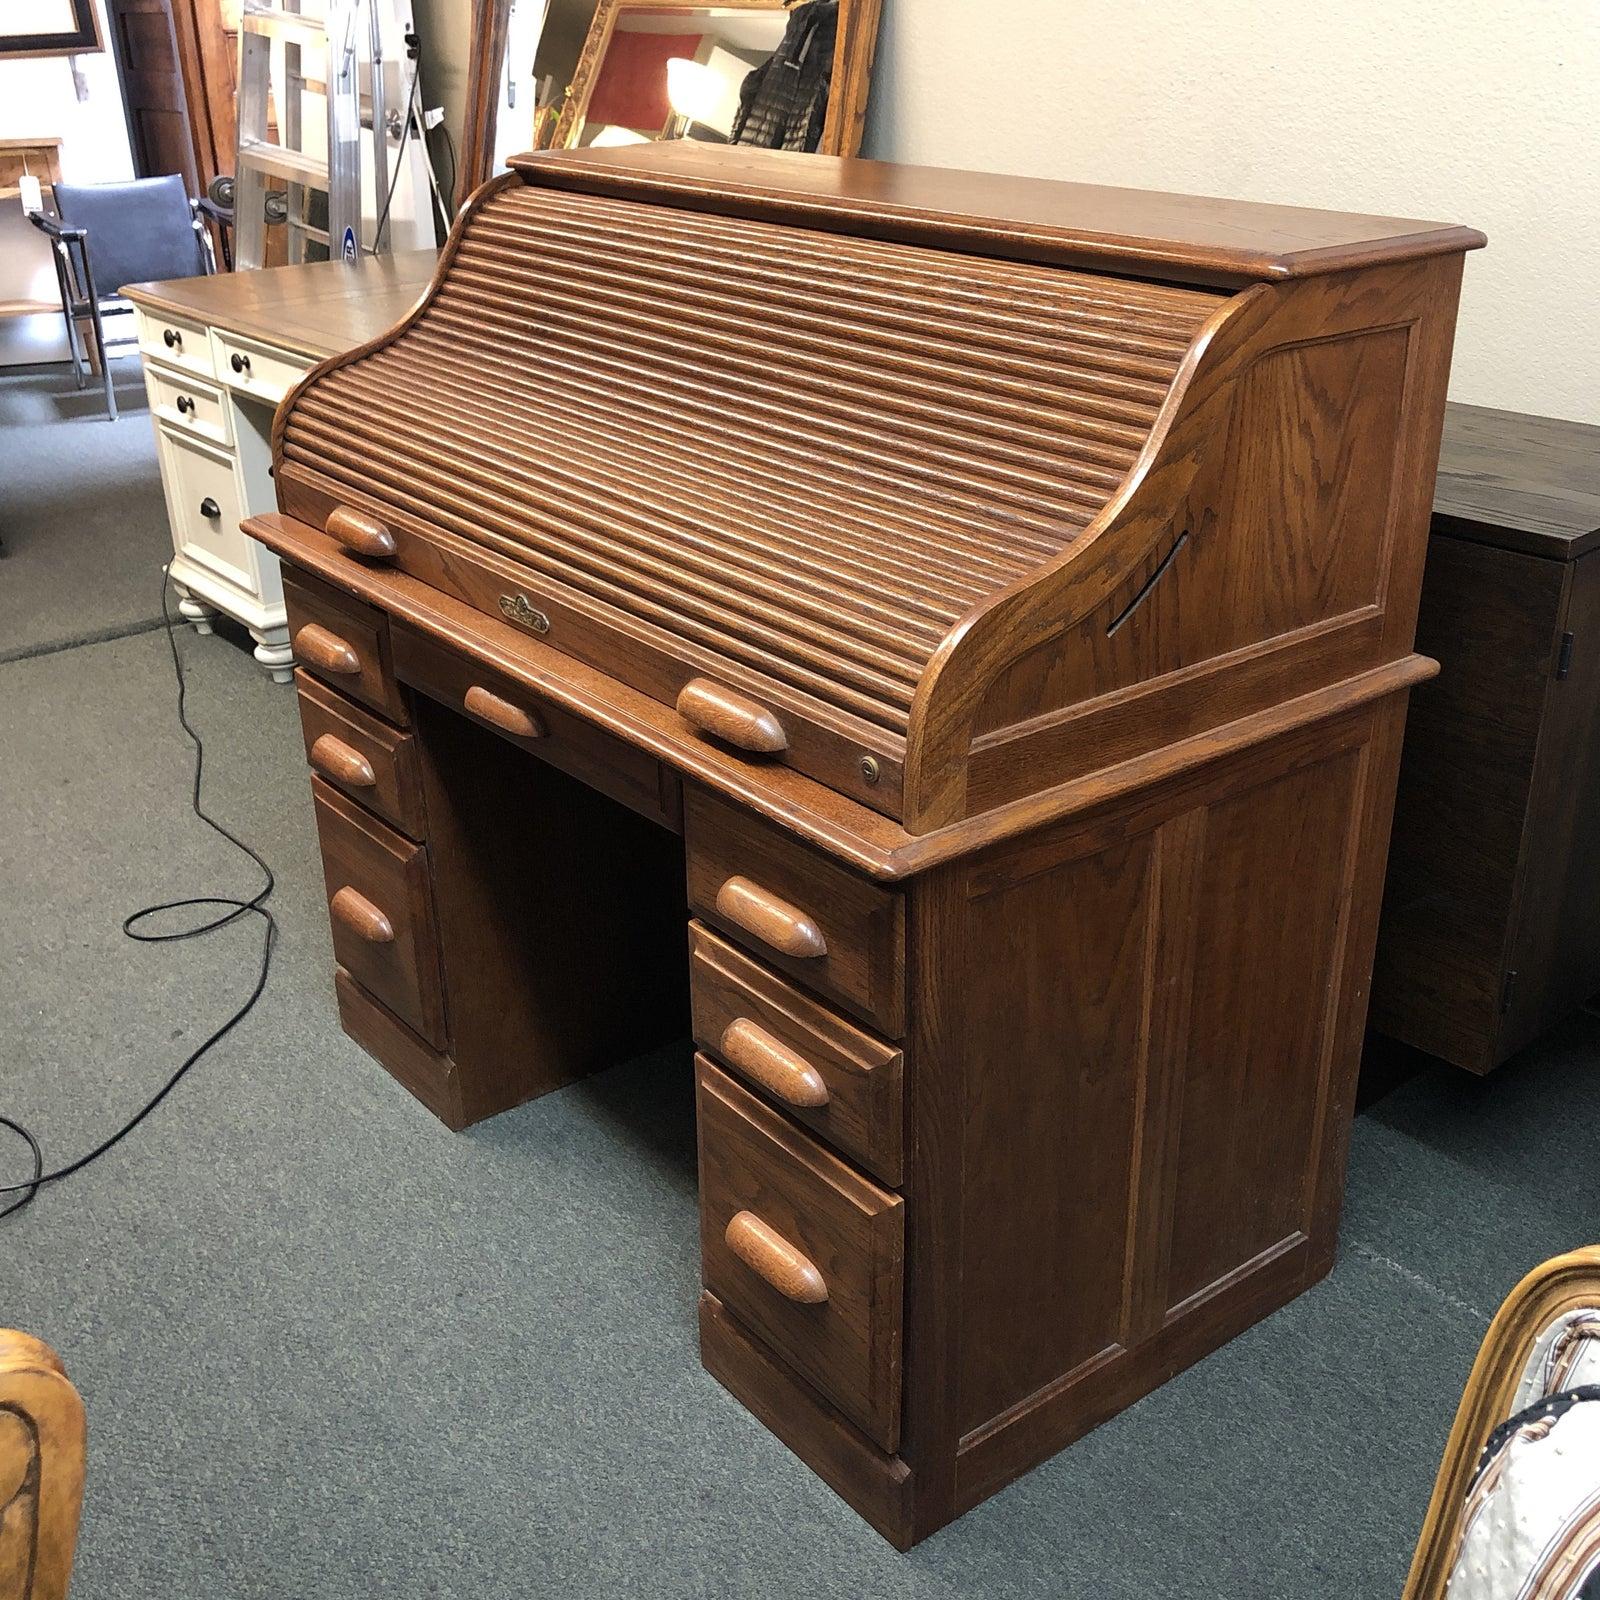 Vintage oak roll top desk. The desk has a number of different sized drawers for organization and storage. The roll top is fully functional. The finish shows age in a good way and retains its warm honey color.